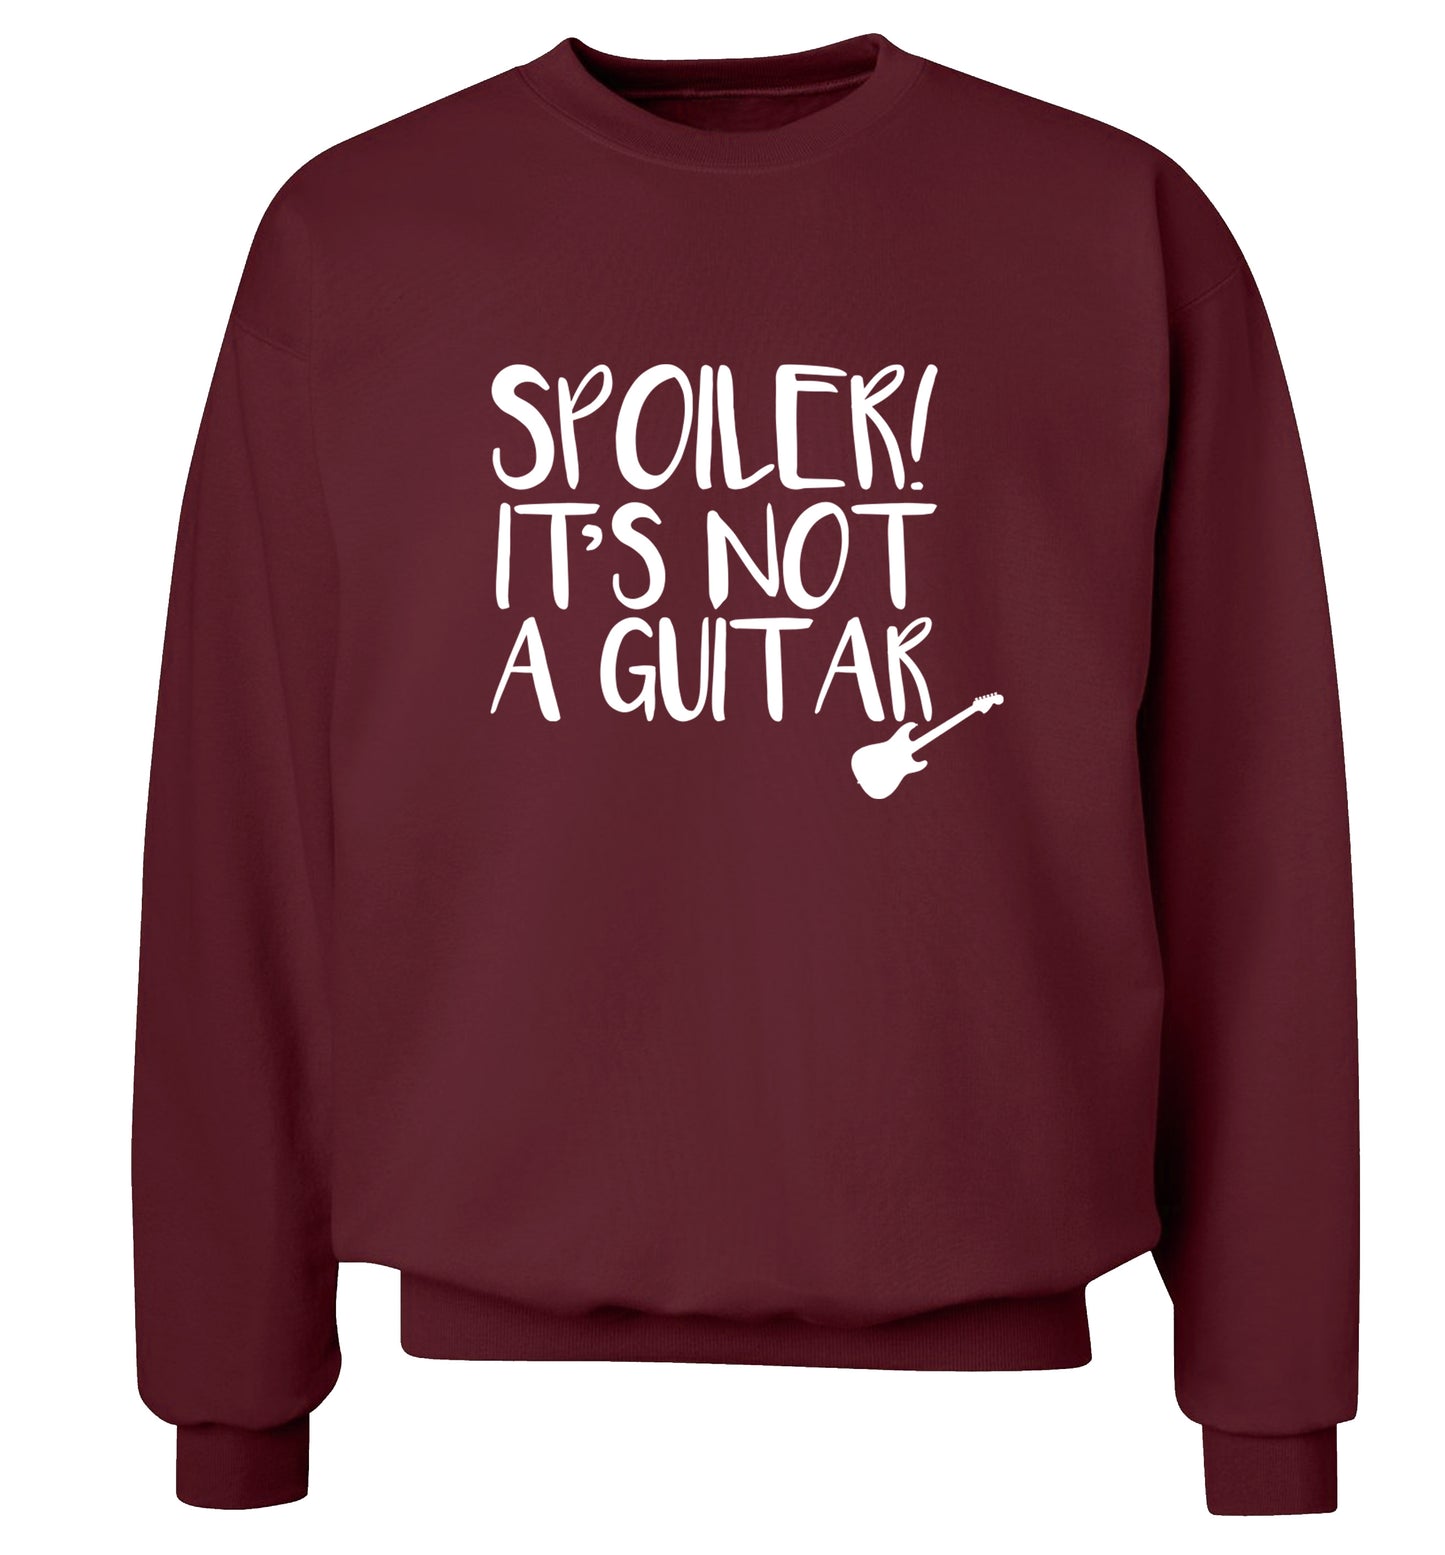 Spoiler it's not a guitar Adult's unisex maroon Sweater 2XL